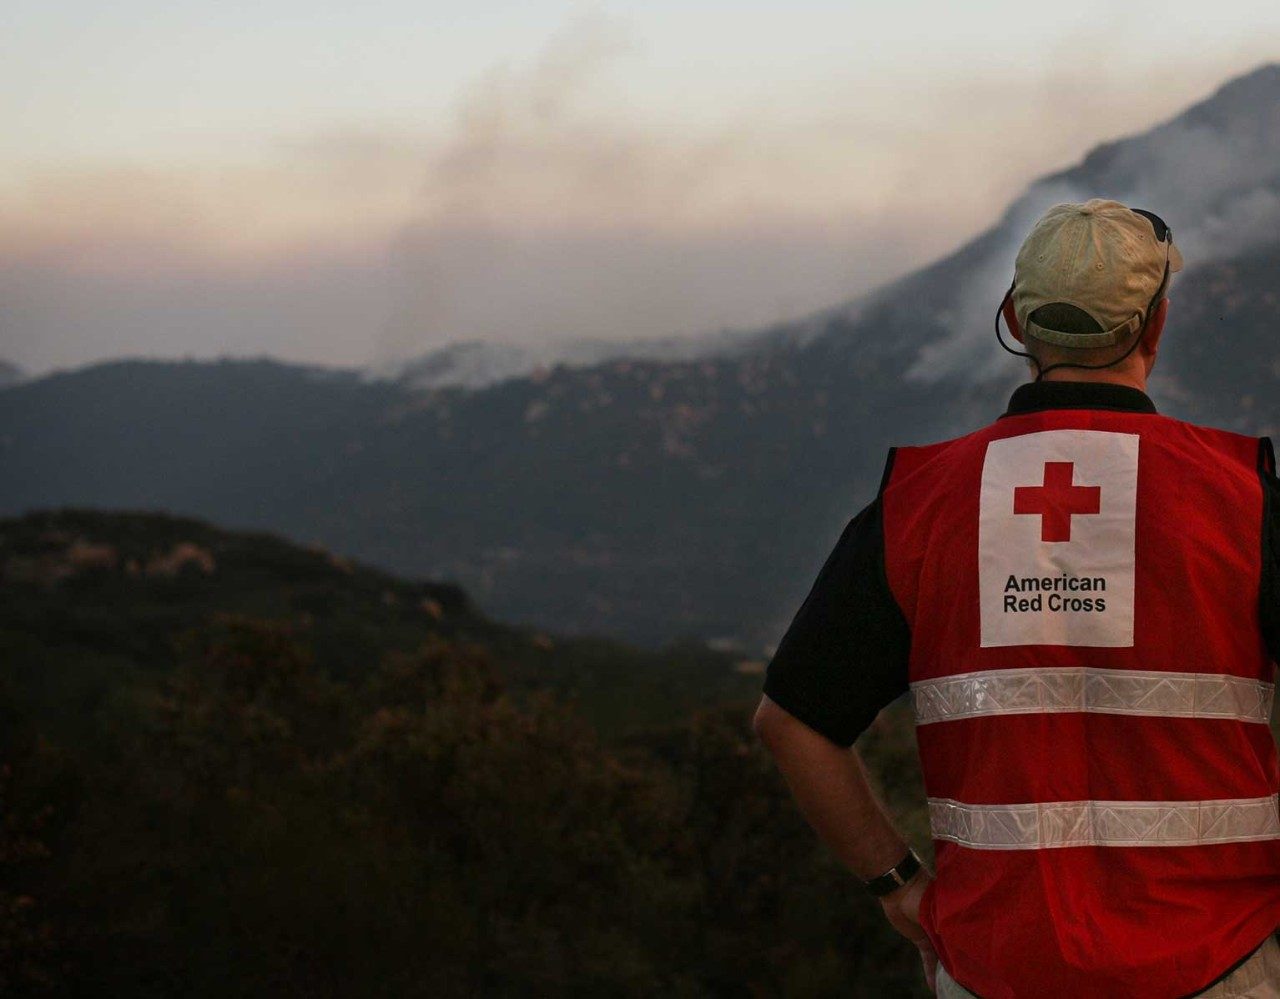 Man looking at mountains wearing red cross vest